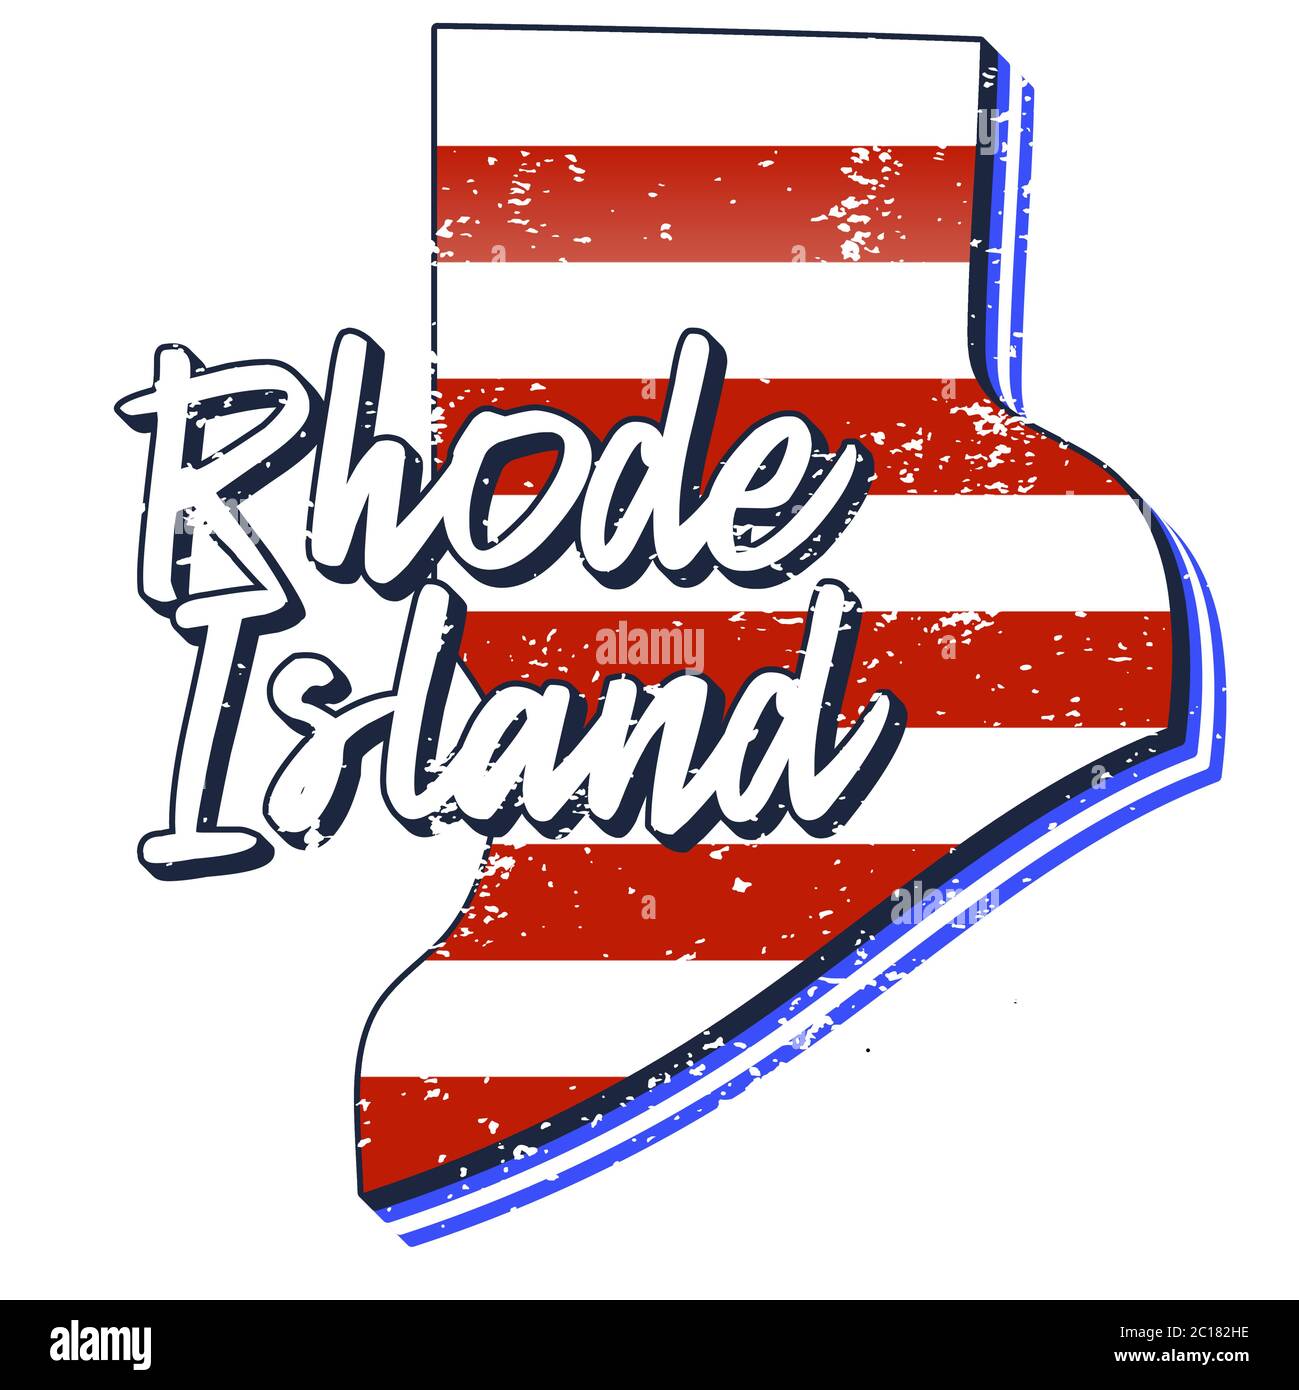 American flag in rhode island state map. Vector grunge style with Typography hand drawn lettering rhode island on map shaped old grunge vintage Americ Stock Vector